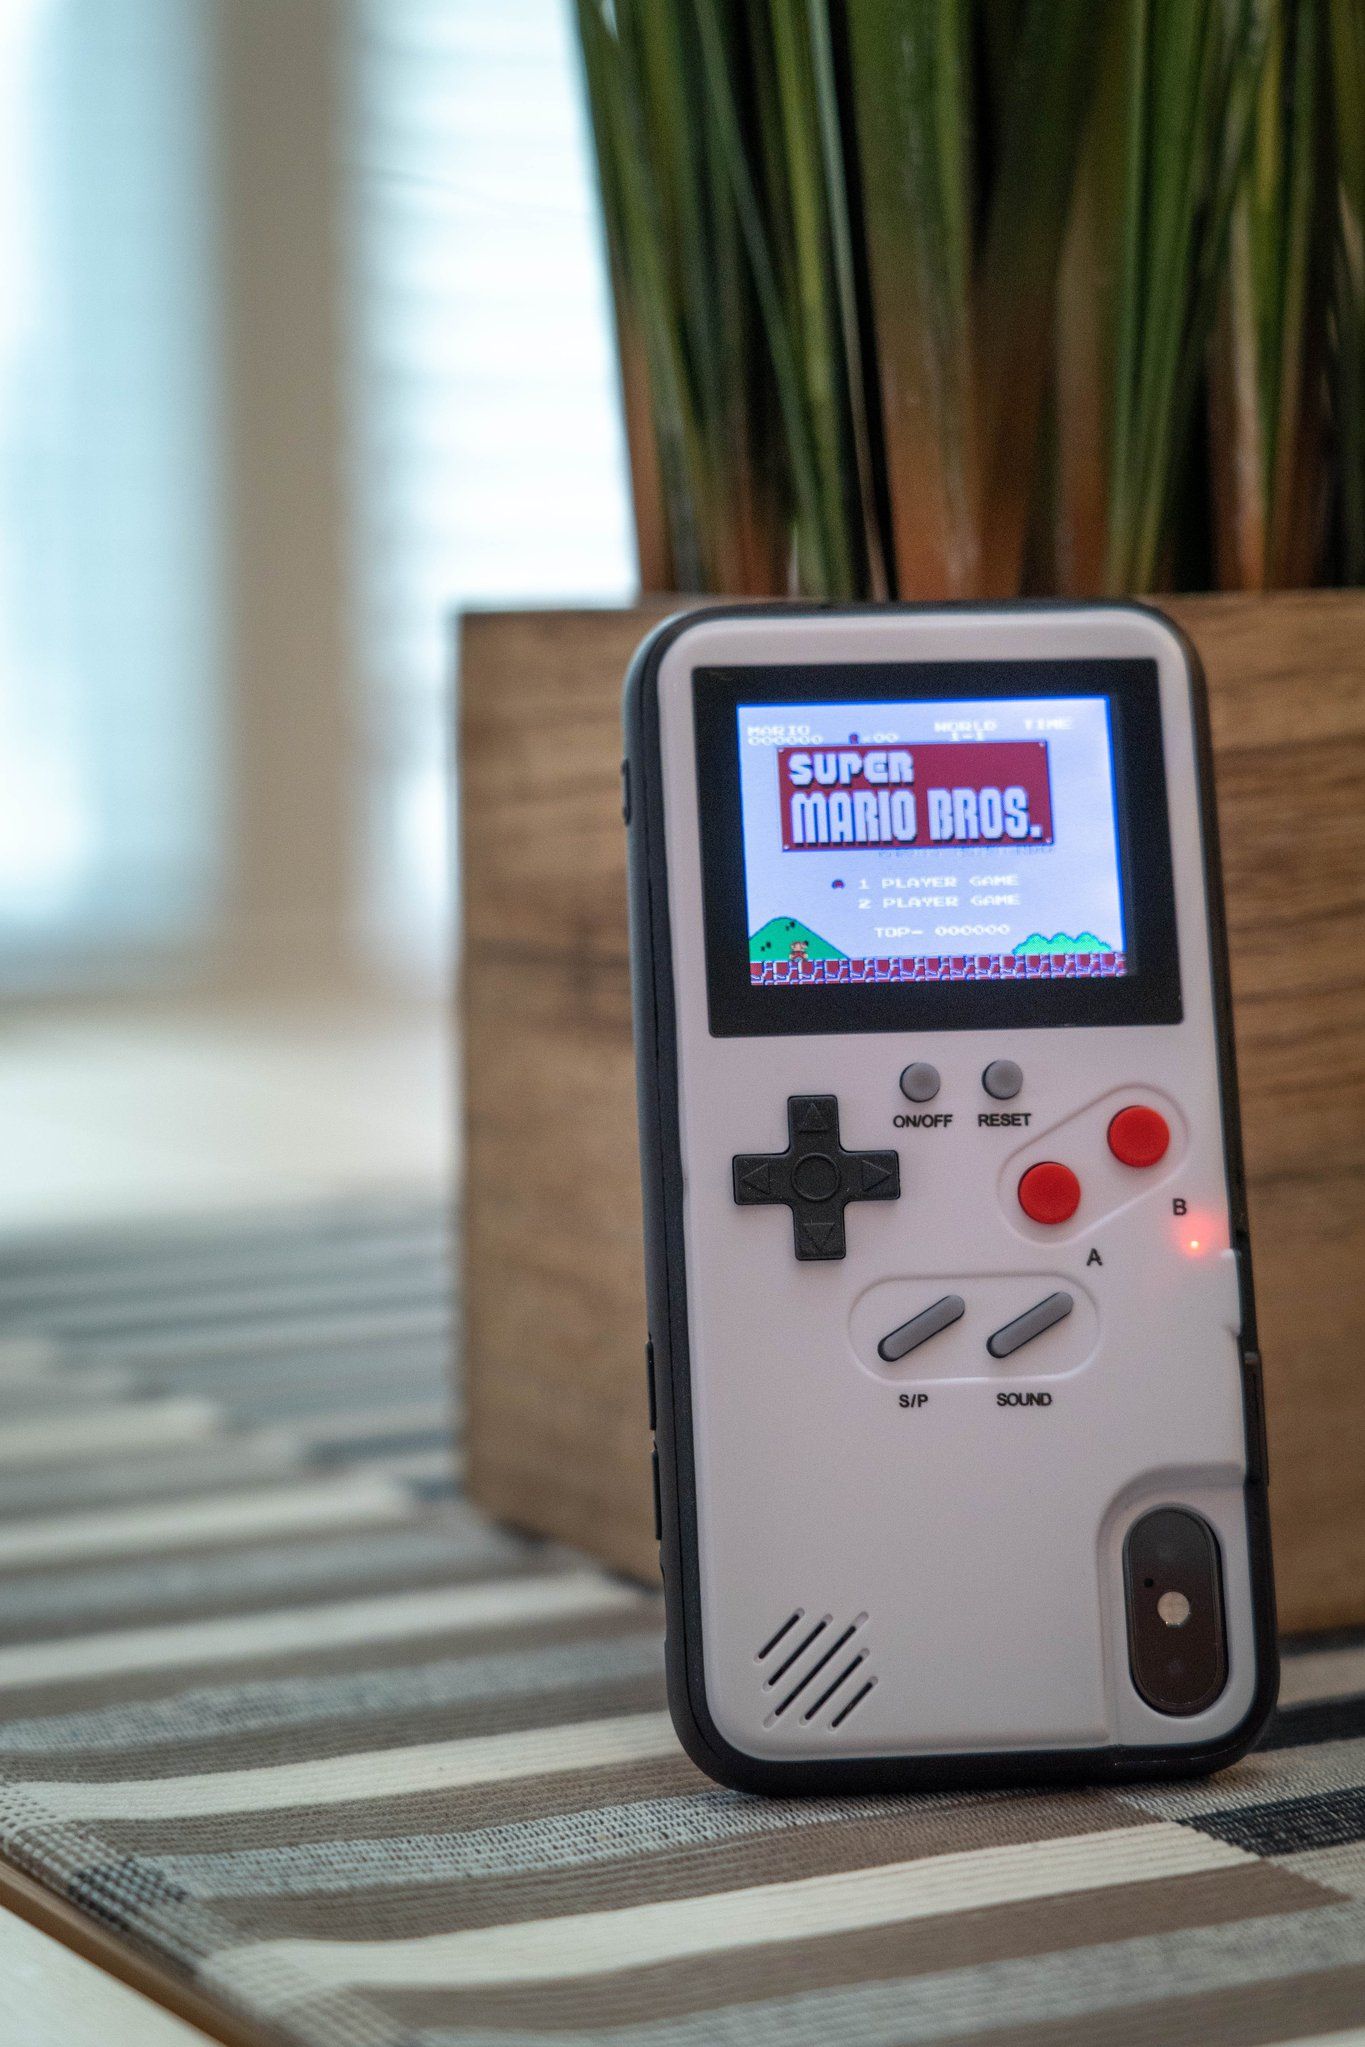 The Caseboy Turns Your Phone Into A Retro Arcade